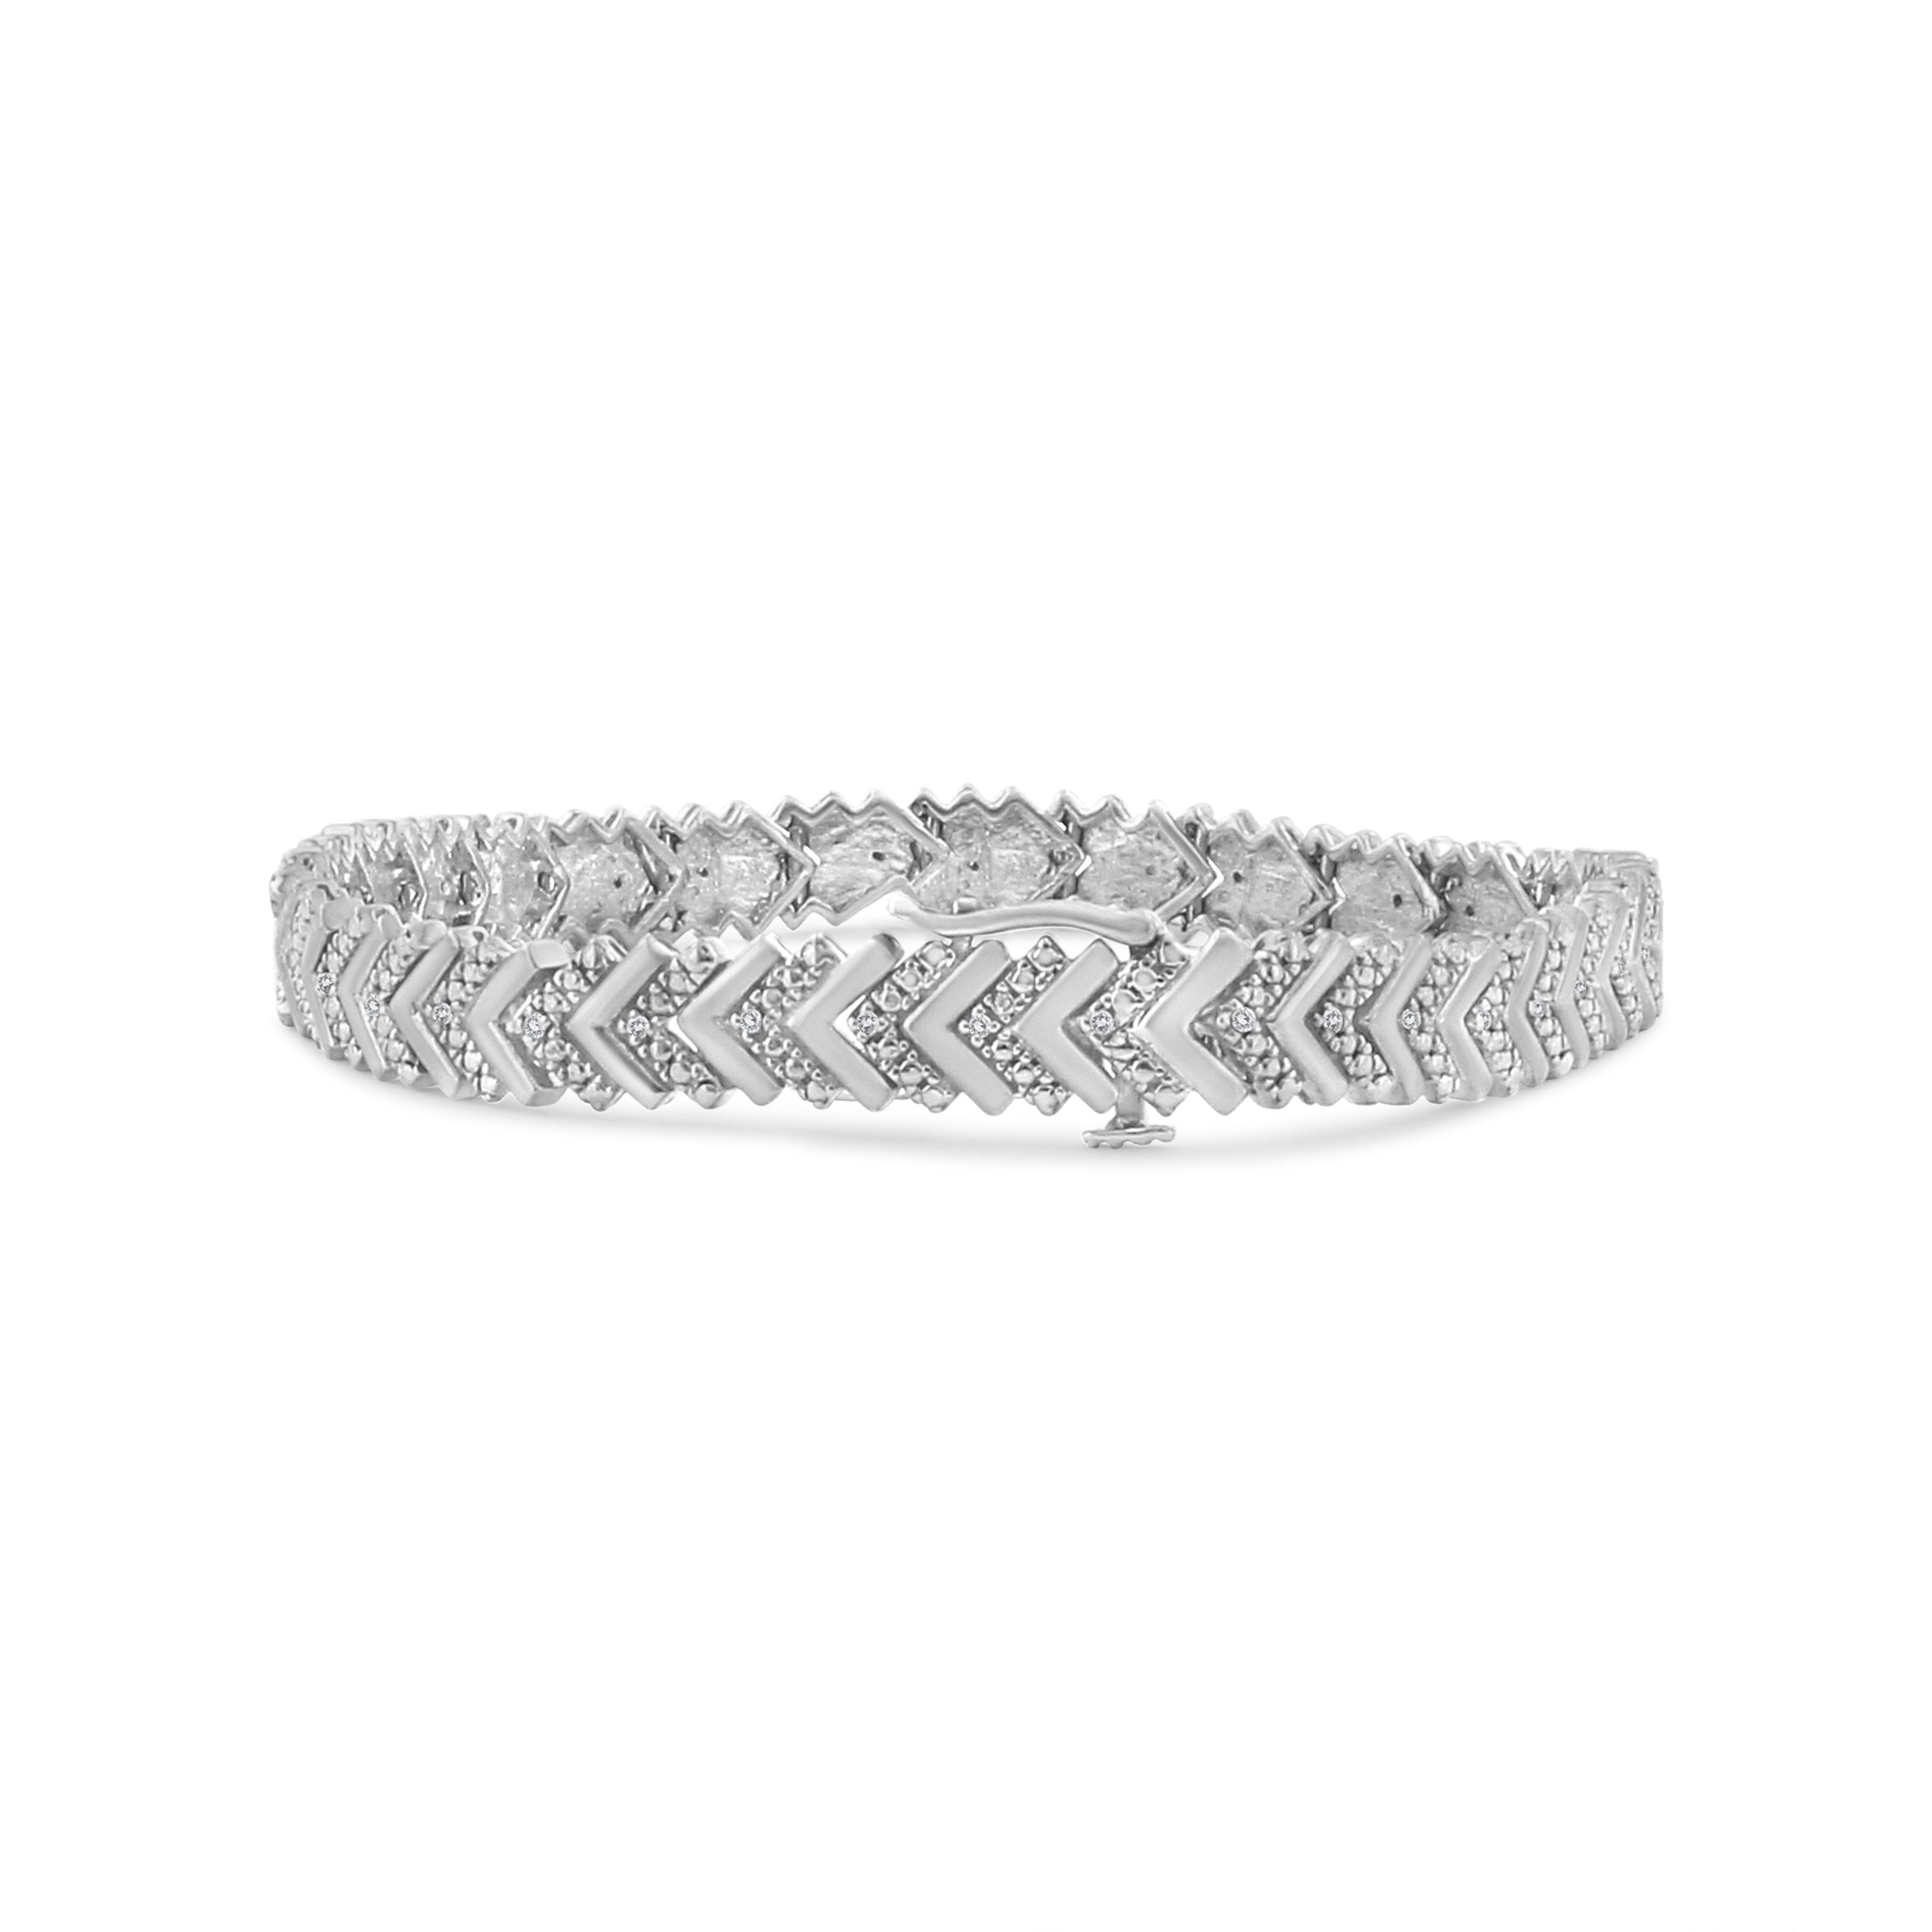 Beautiful and eye-catching, this stunning link bracelet has a total diamond weight of 1/6 c.t. This piece is crafted in genuine .925 sterling silver, a metal that will stay tarnish free for years to come. The design of this bracelet is an